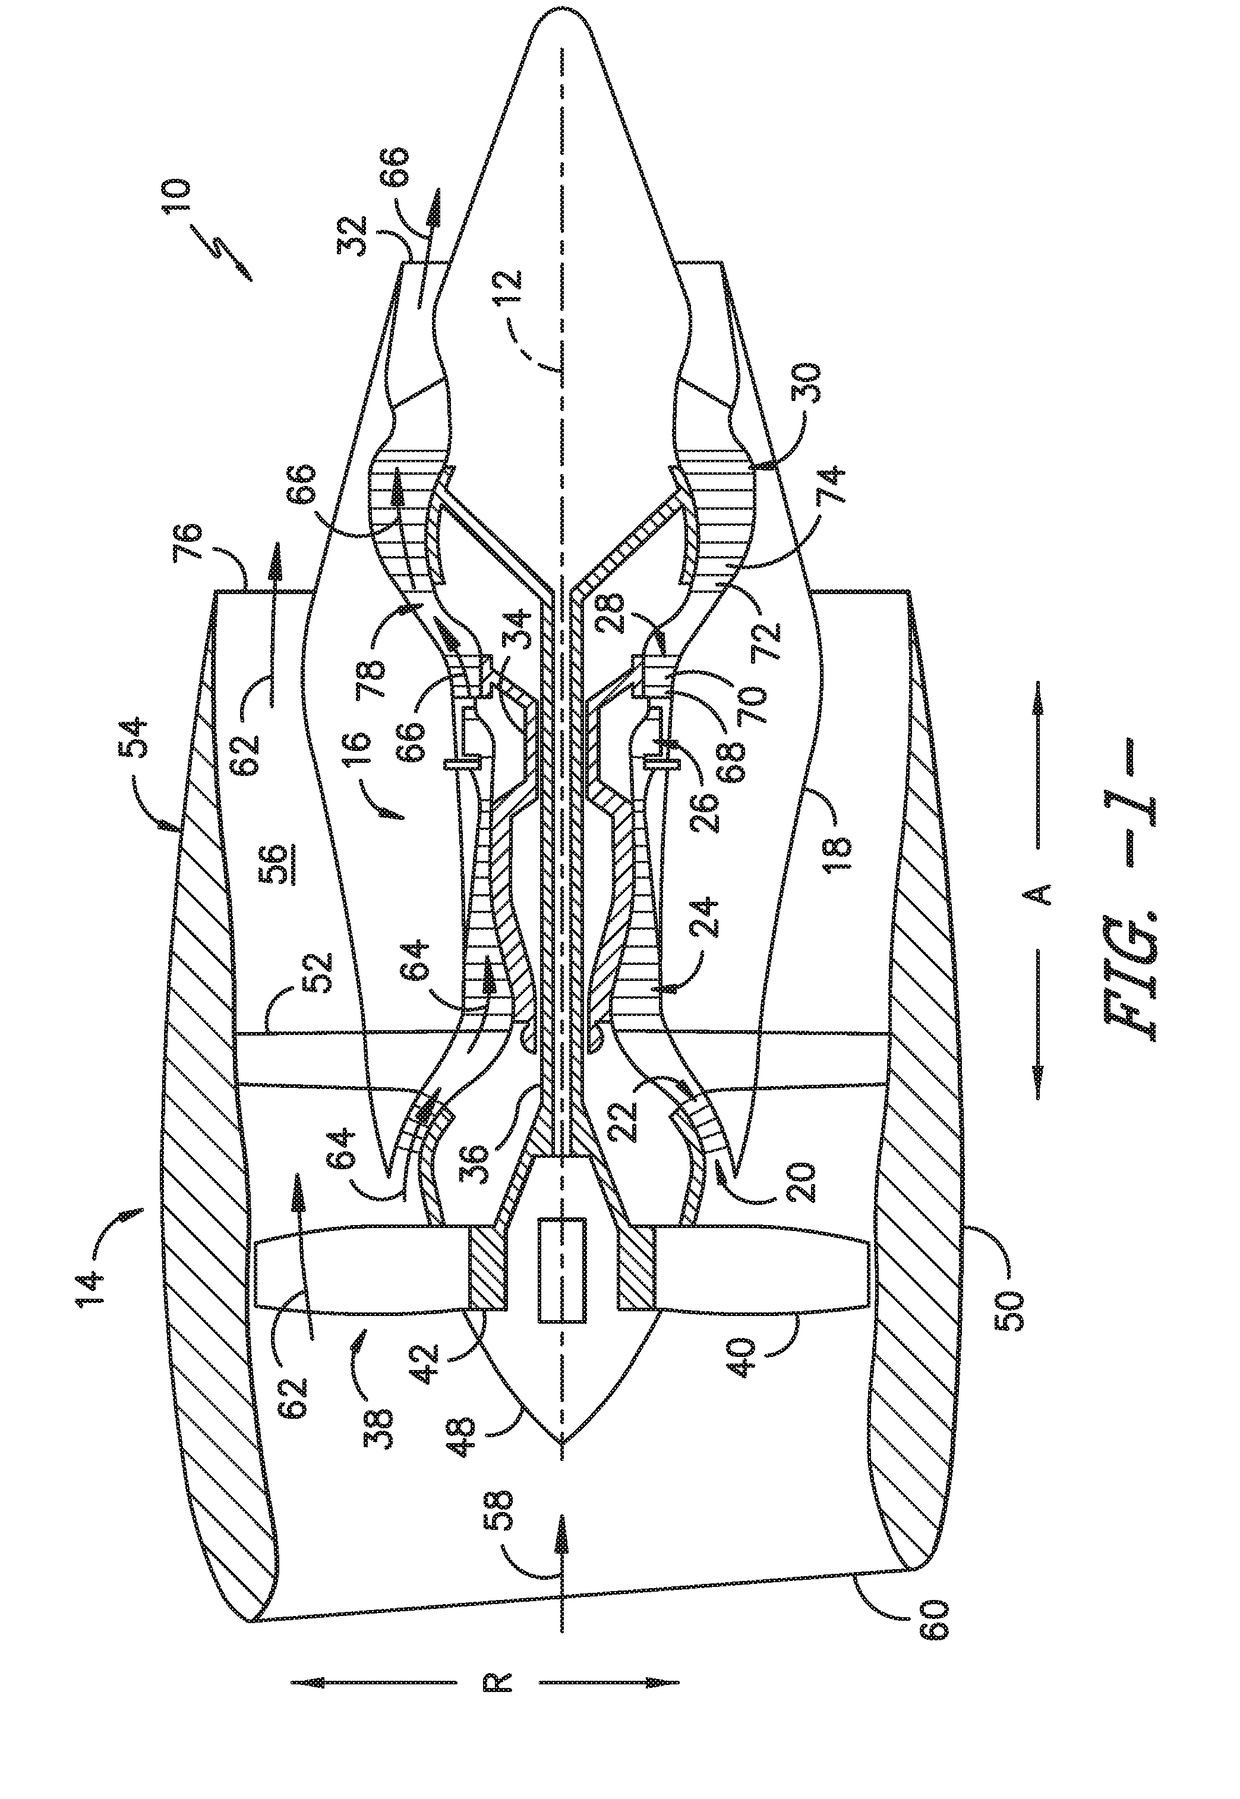 Flow path assemblies for gas turbine engines and assembly methods therefore